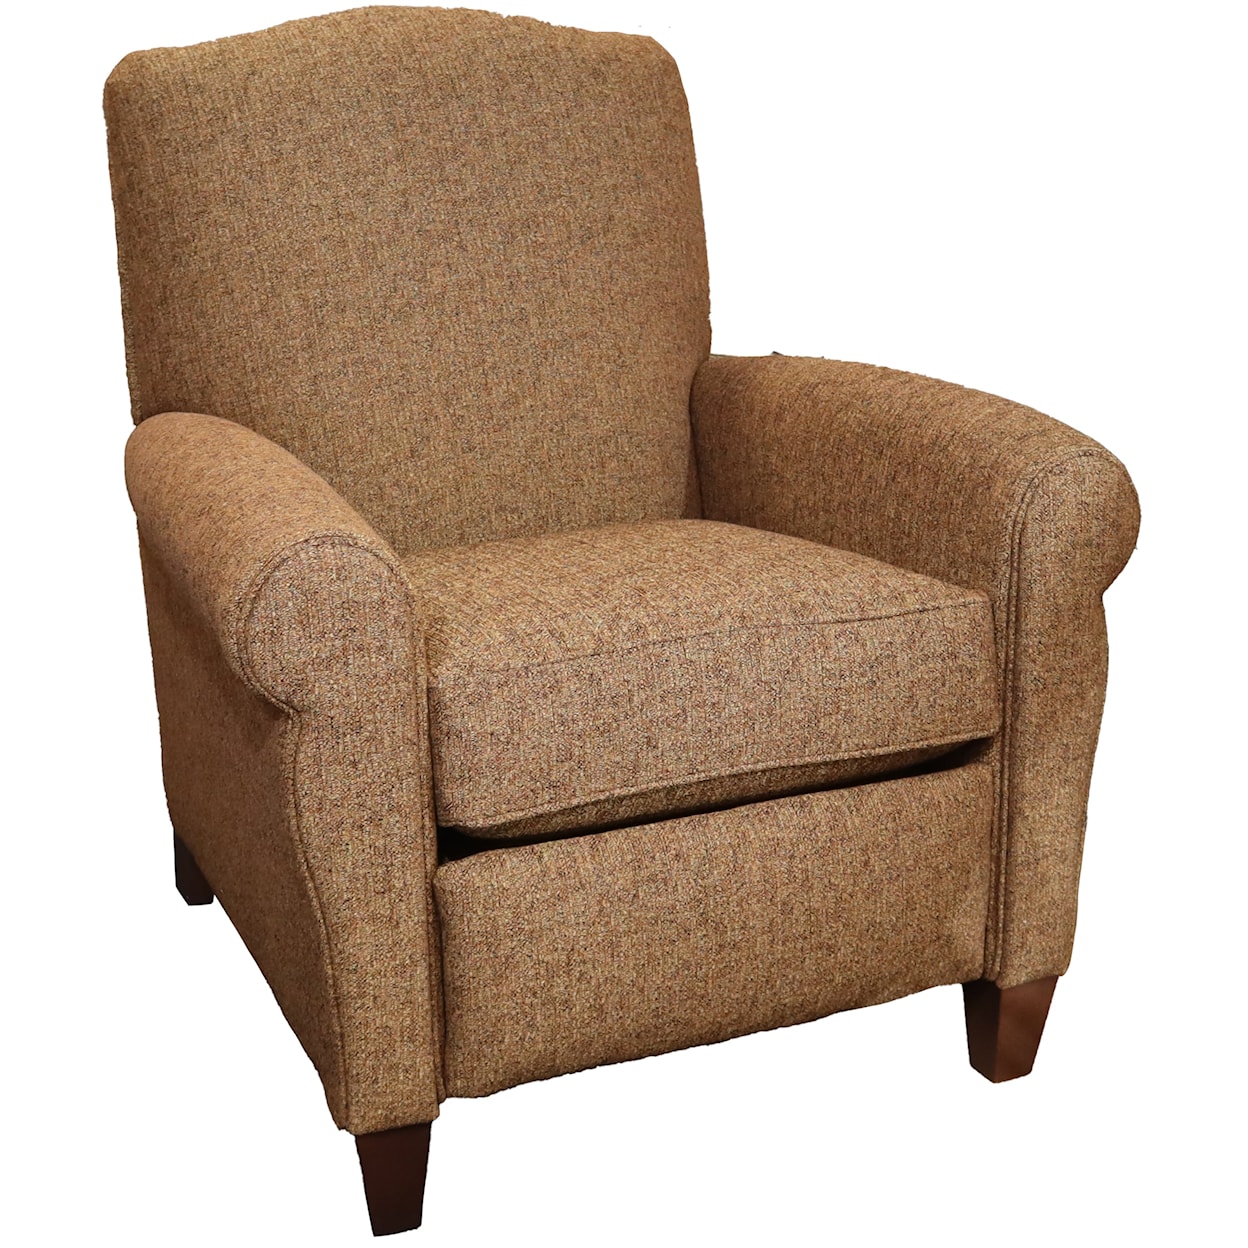 Smith Brothers 713 Pressback Recliner